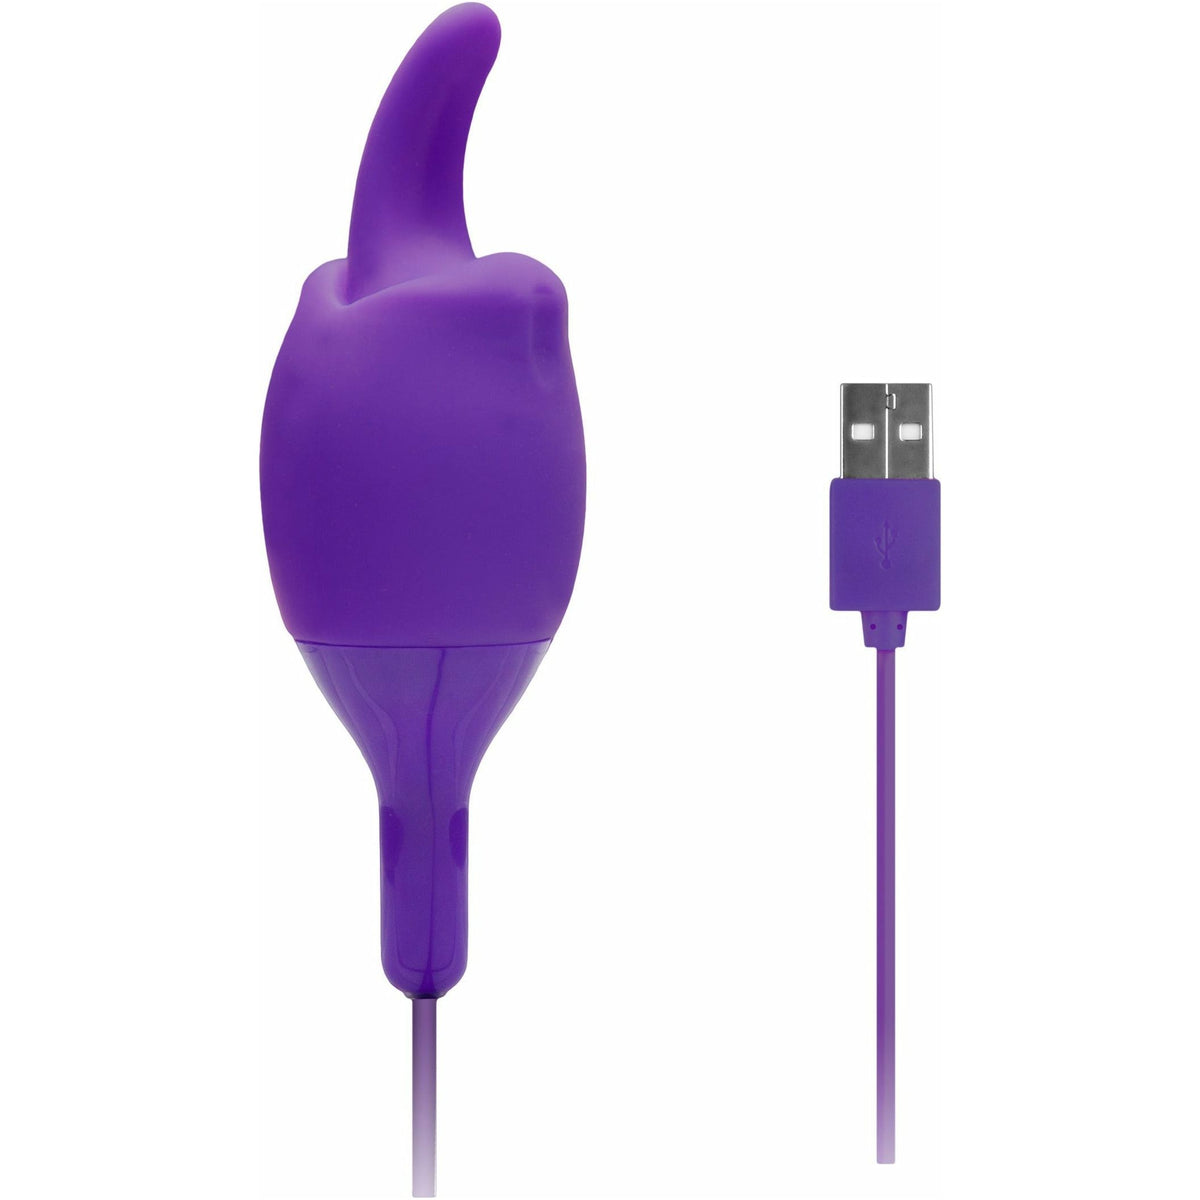 NMC Hold Tight - Tongue Vibrator - Rechargeable - Purple